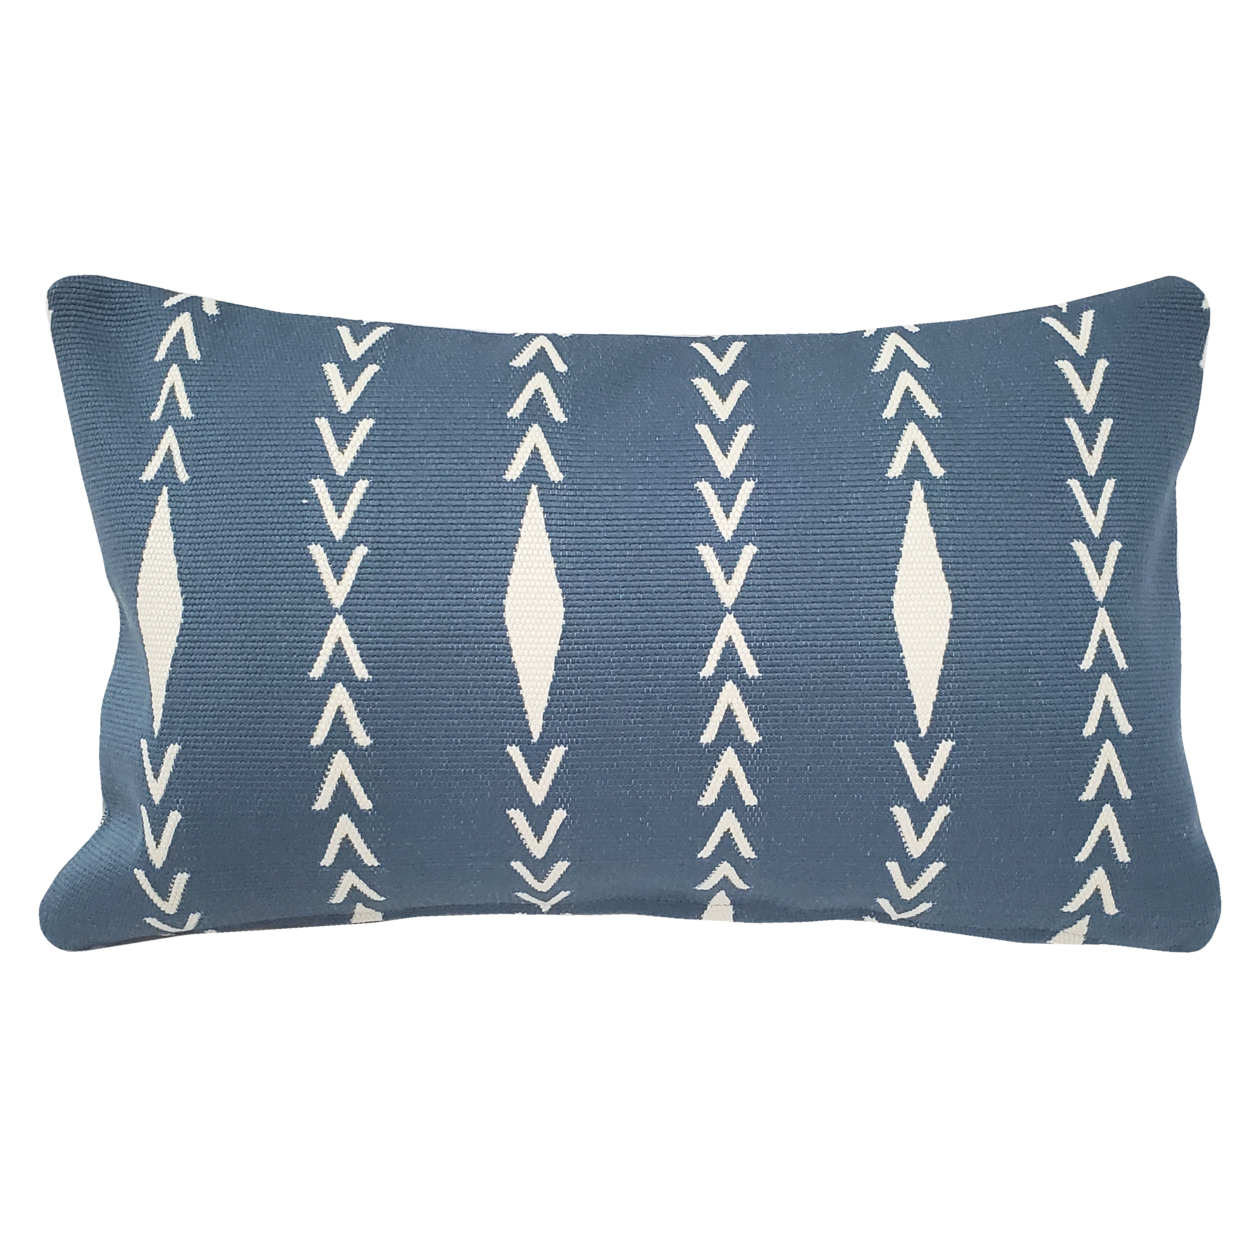 Diamond Ray Mineral Blue Throw Pillow 12x20, With Polyfill Insert